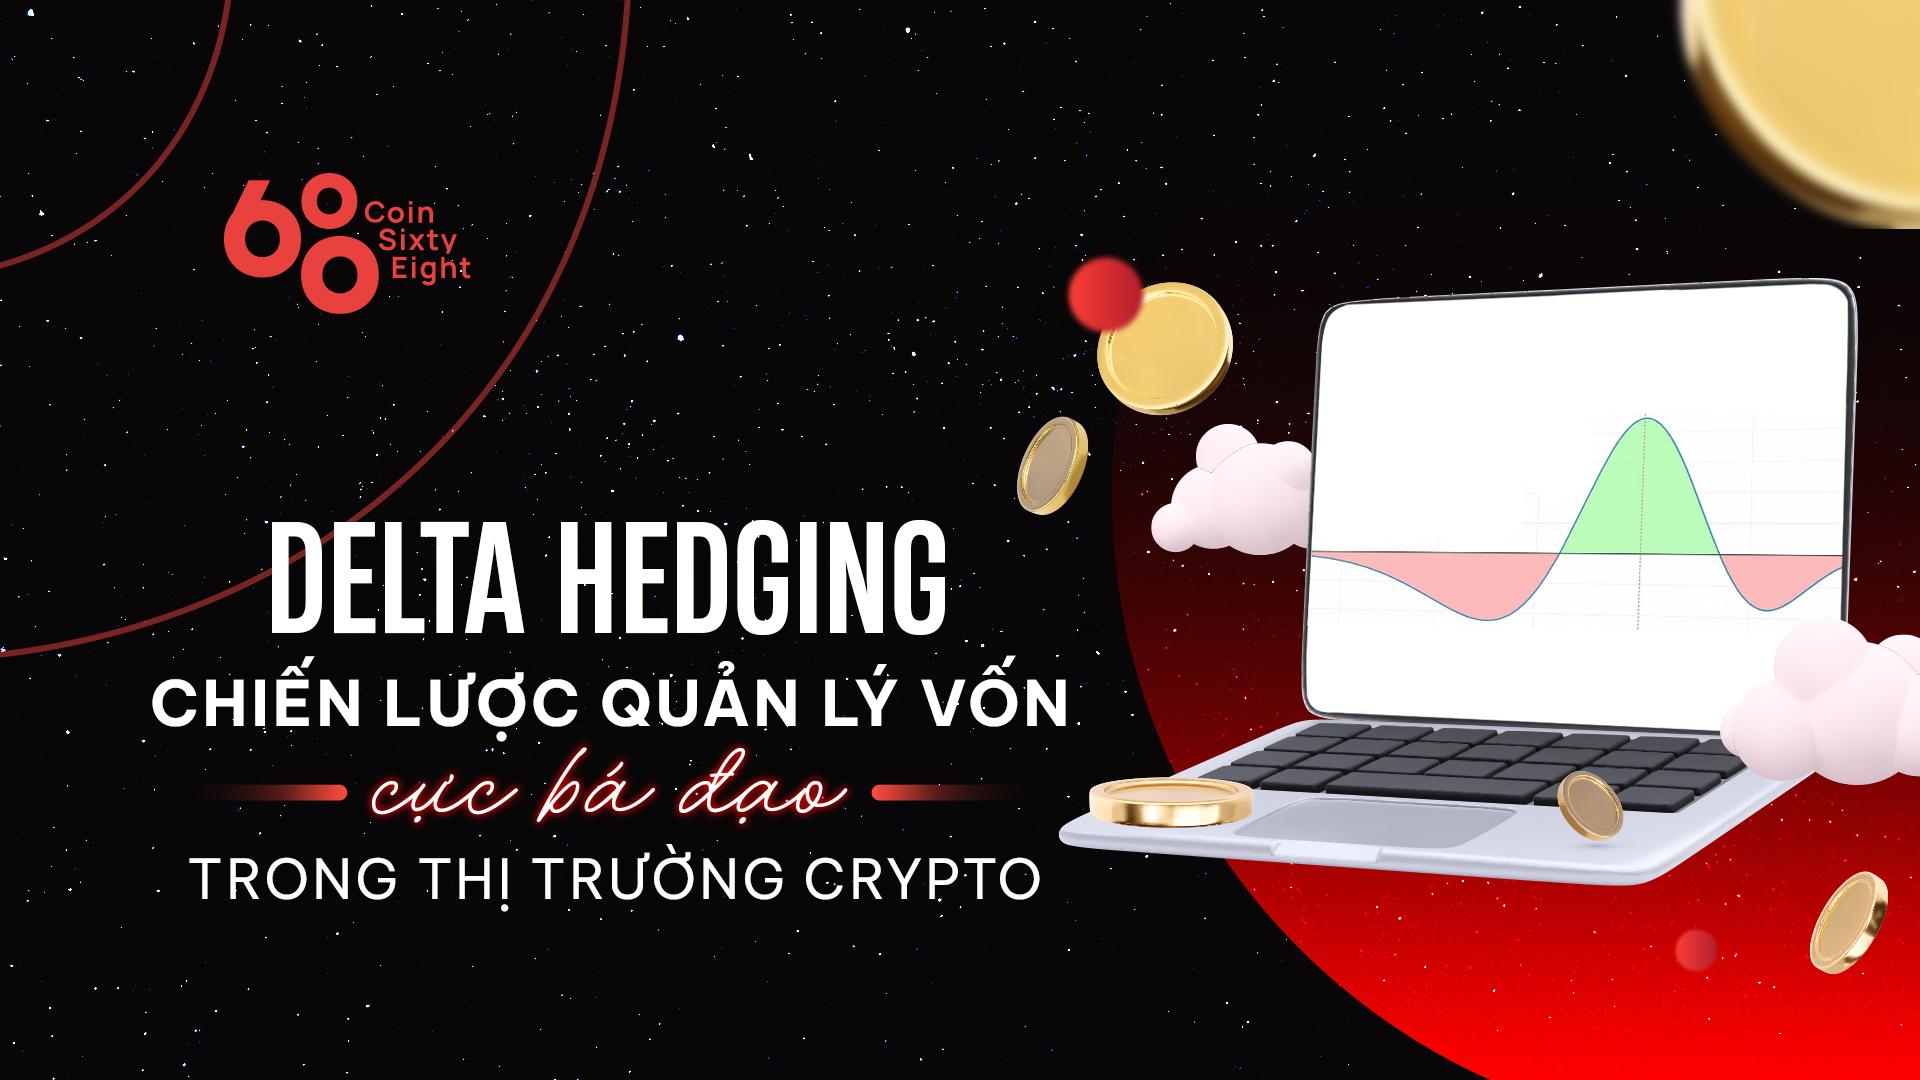 delta-hedging-chien-luoc-quan-ly-von-cuc-ba-dao-trong-thi-truong-crypto